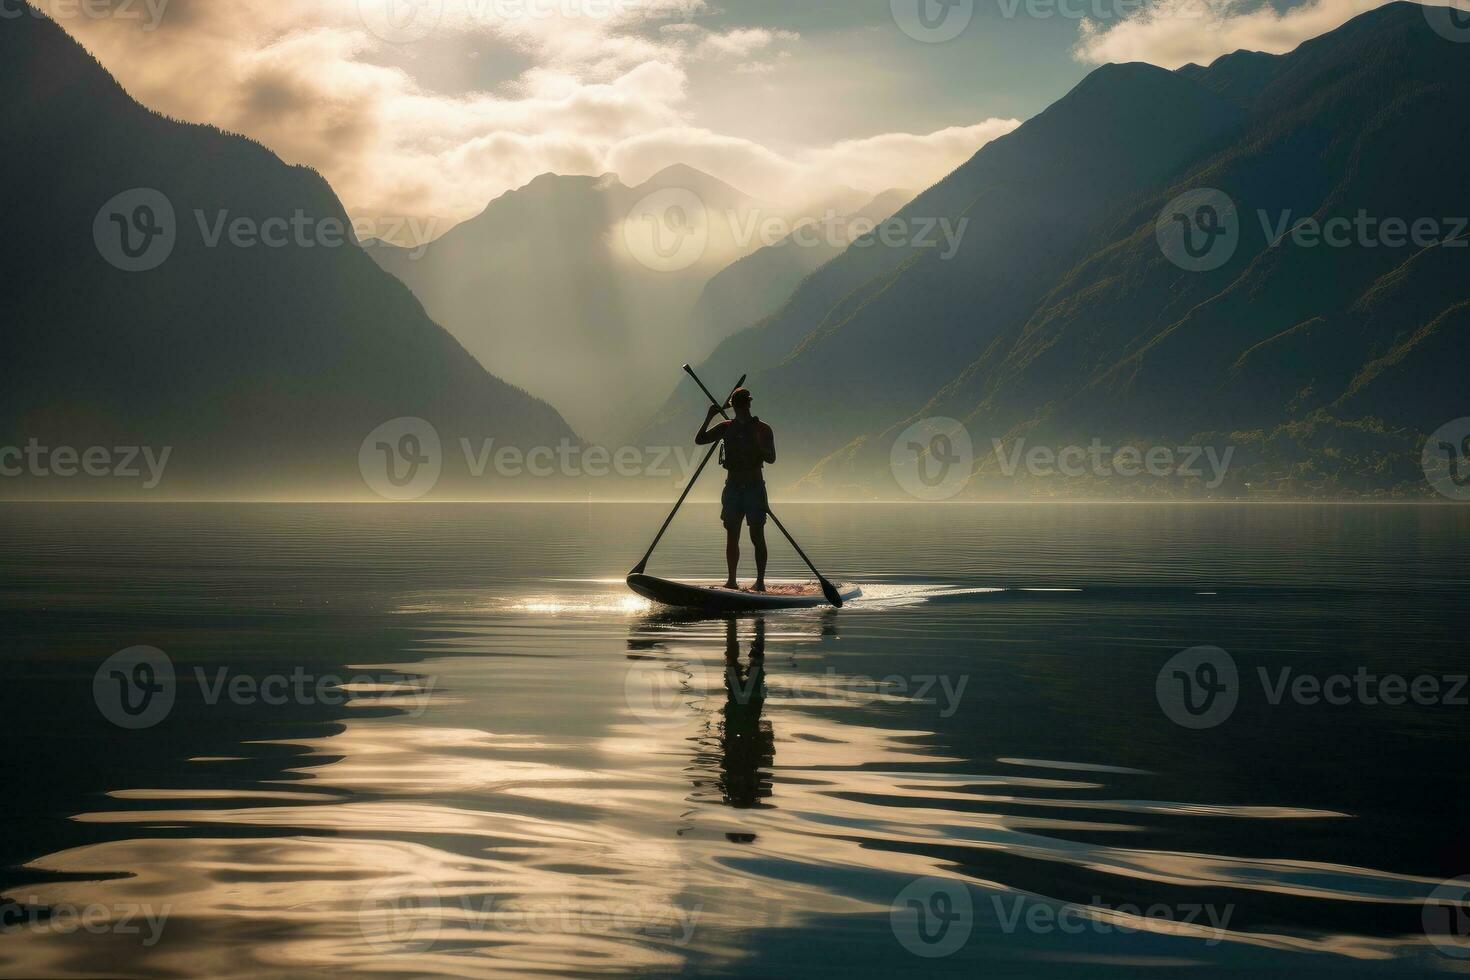 A man engages in stand-up paddleboarding on a serene lake photo